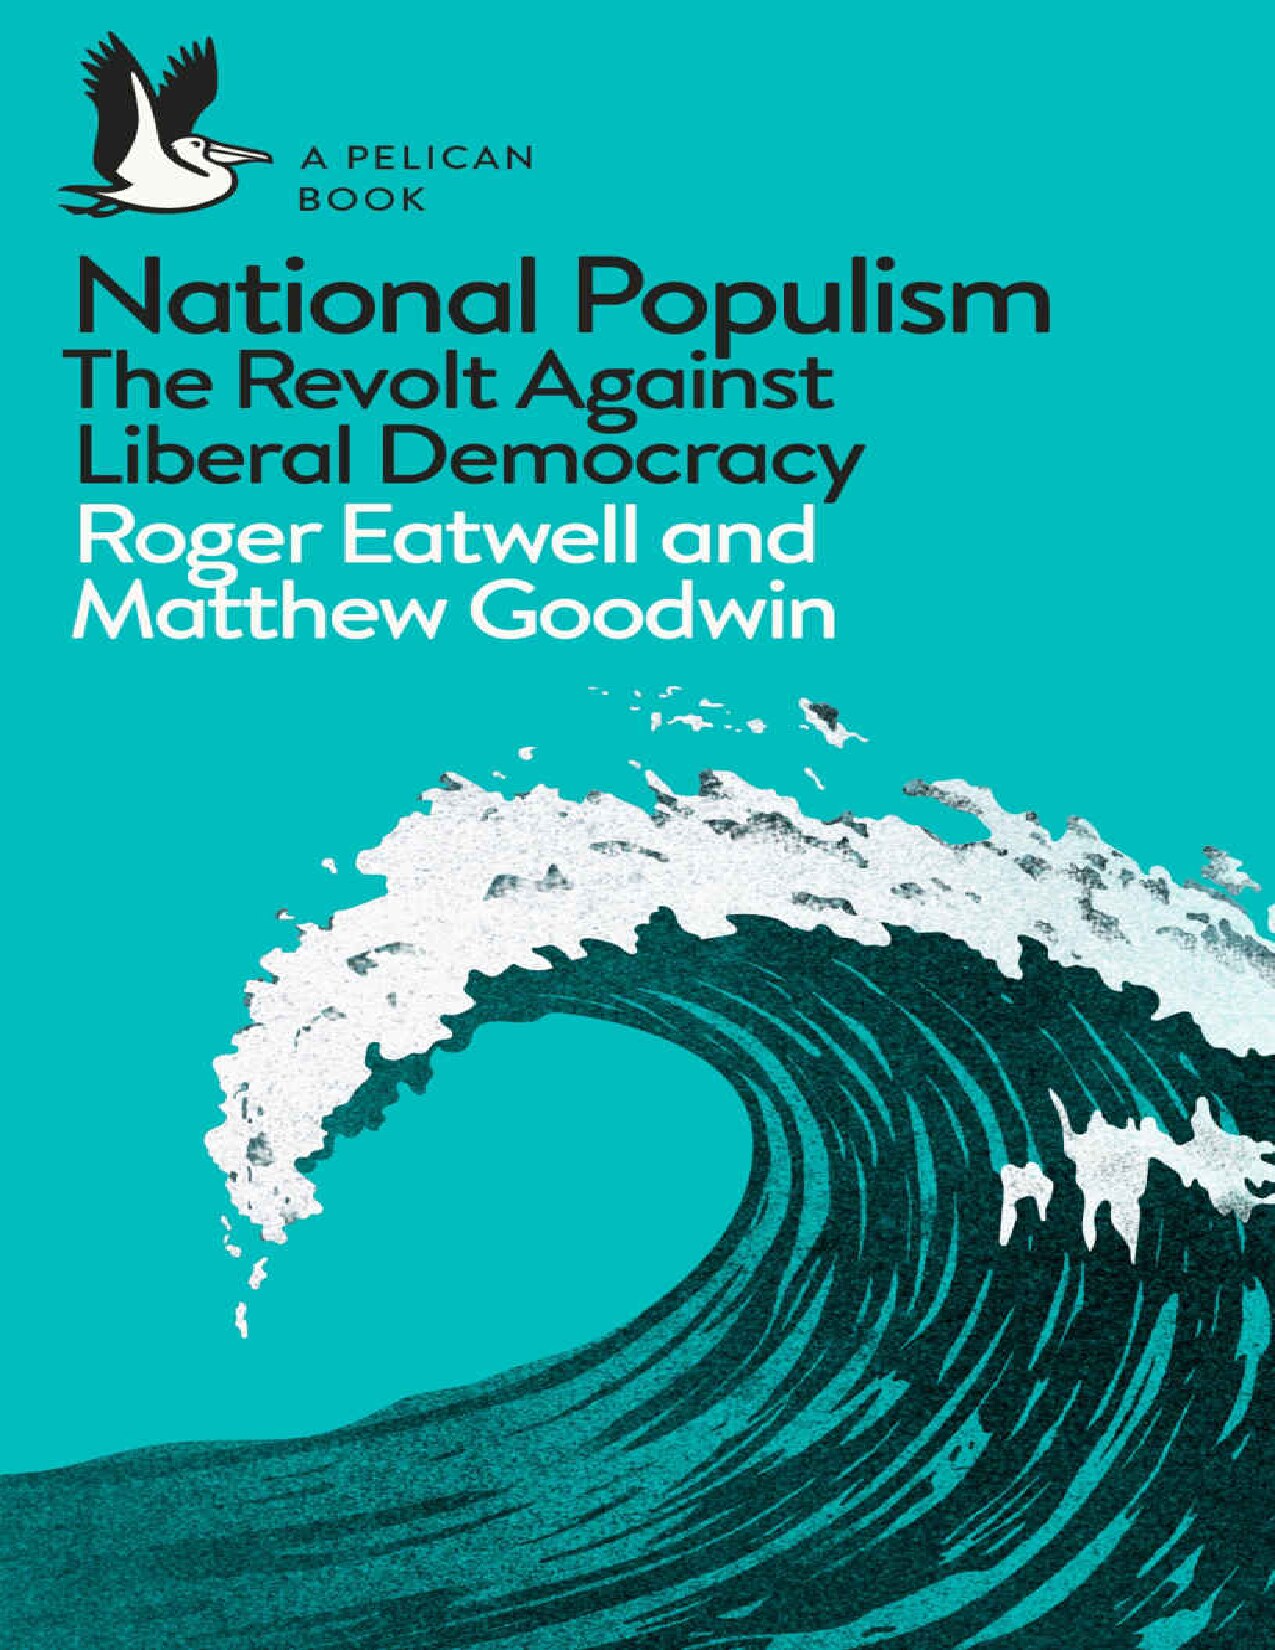 National Populism: The Revolt Against Liberal Democracy (Pelican Books)